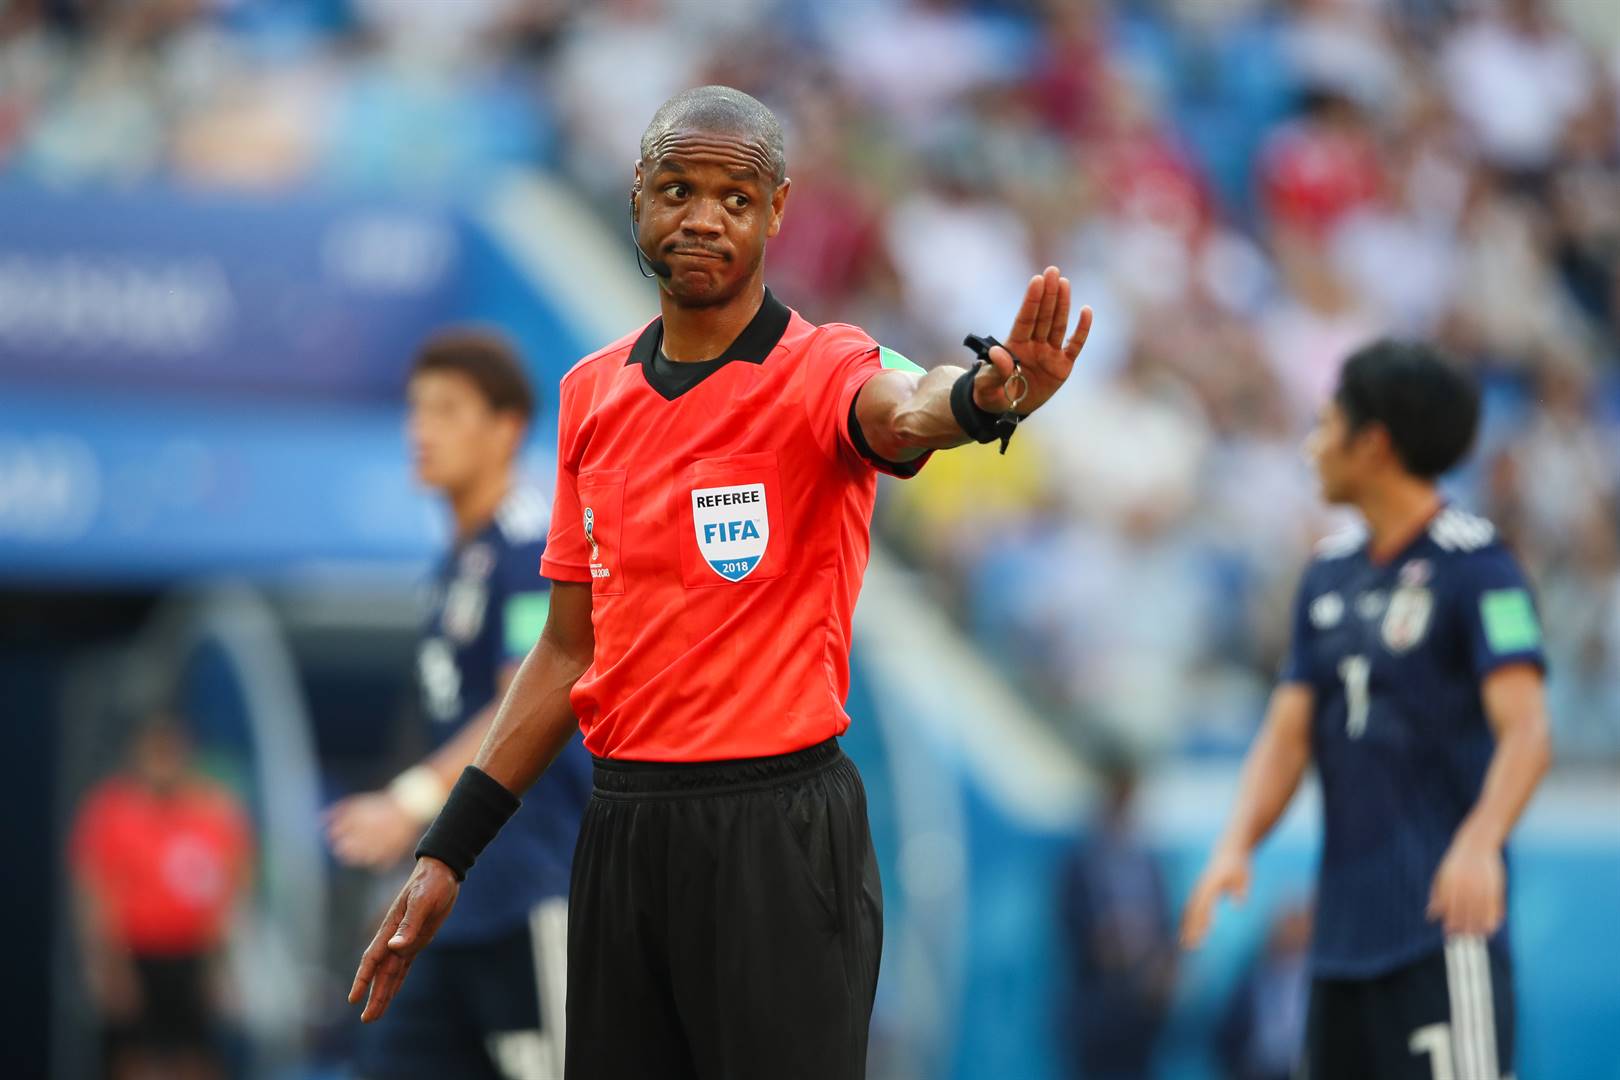 Referee Janny Sikazwe is said to have suffered sunstroke during the Afcon match in which he prematurely blew the final whistle twice. Photo: Matthew Ashton/AMA/Getty Images  